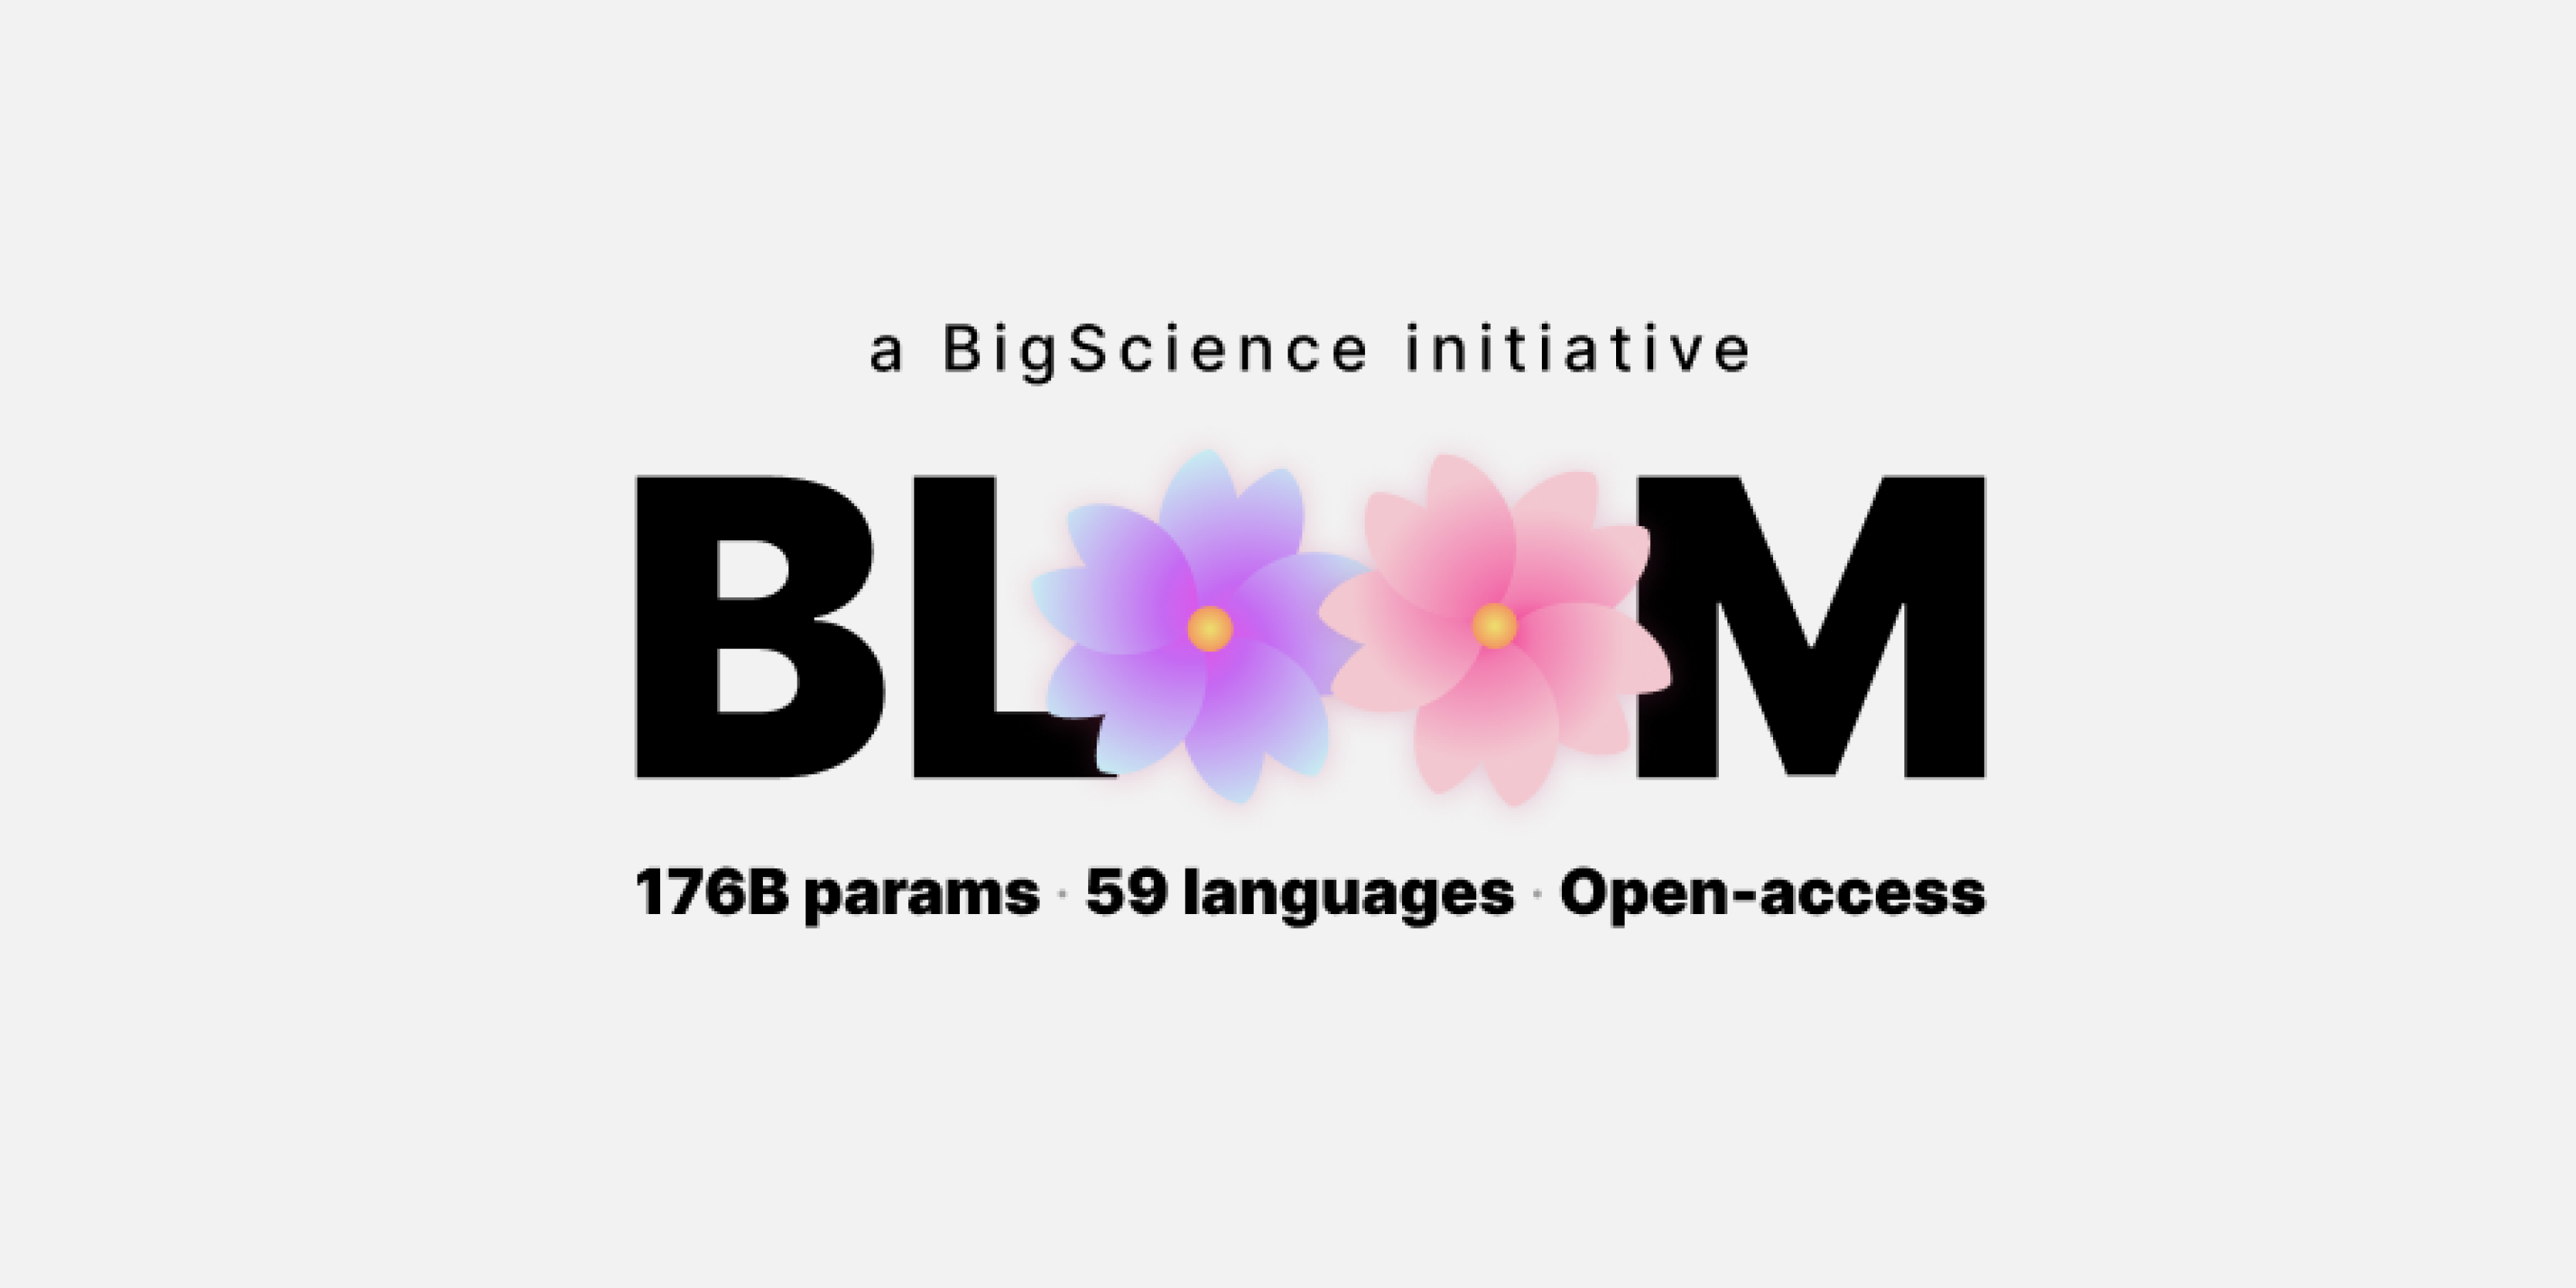 Introducing the largest open science multilingual model ever trained

